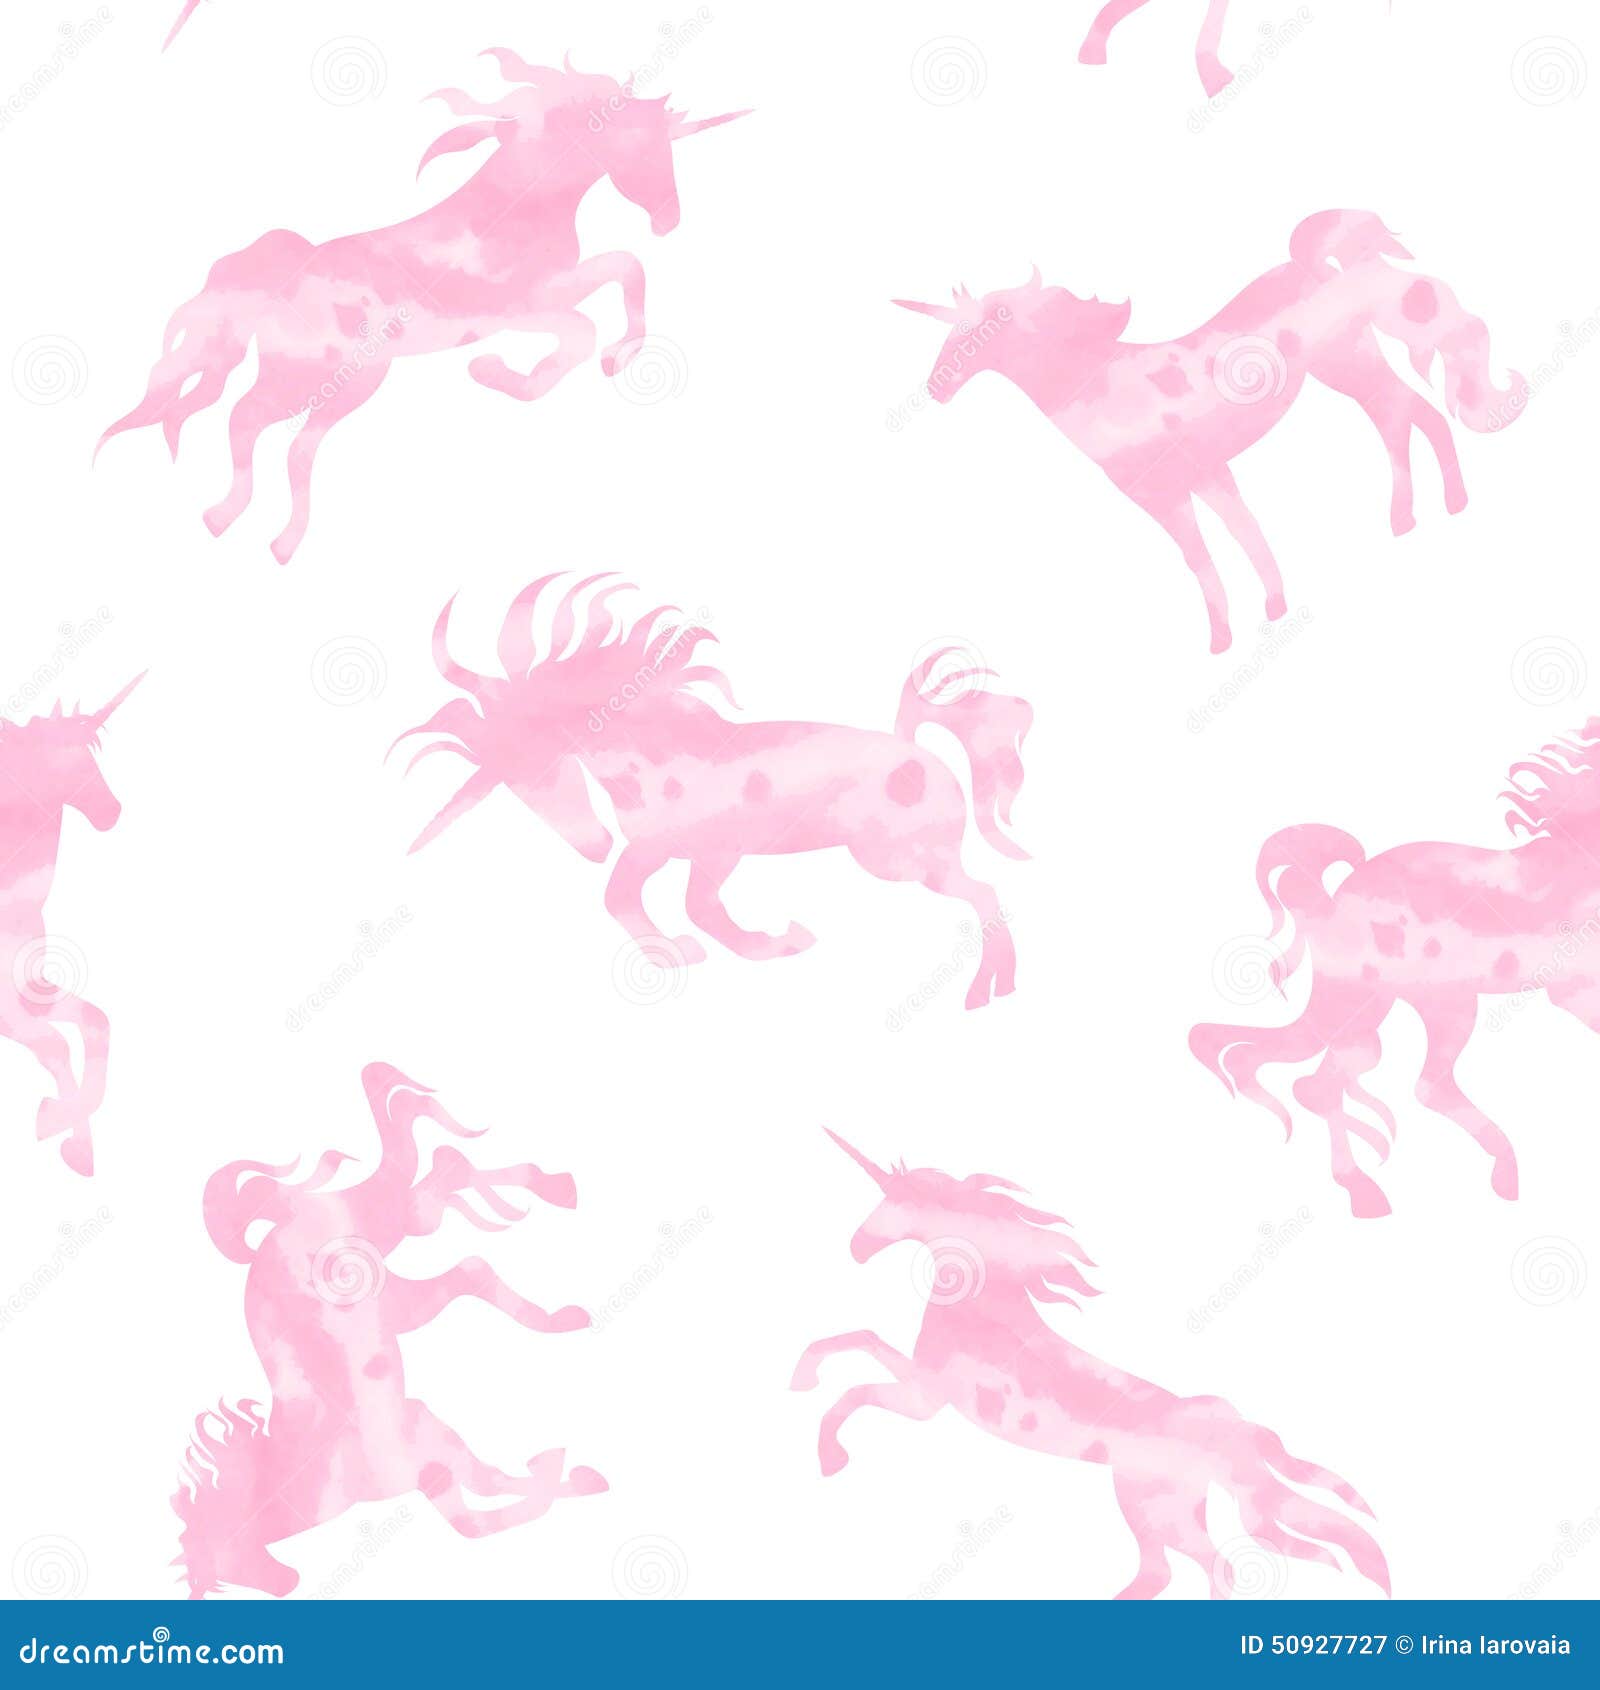 editable tumblr backgrounds themes Pattern  Vector 50927727 Watercolor Unicorn Stock Image: Pink